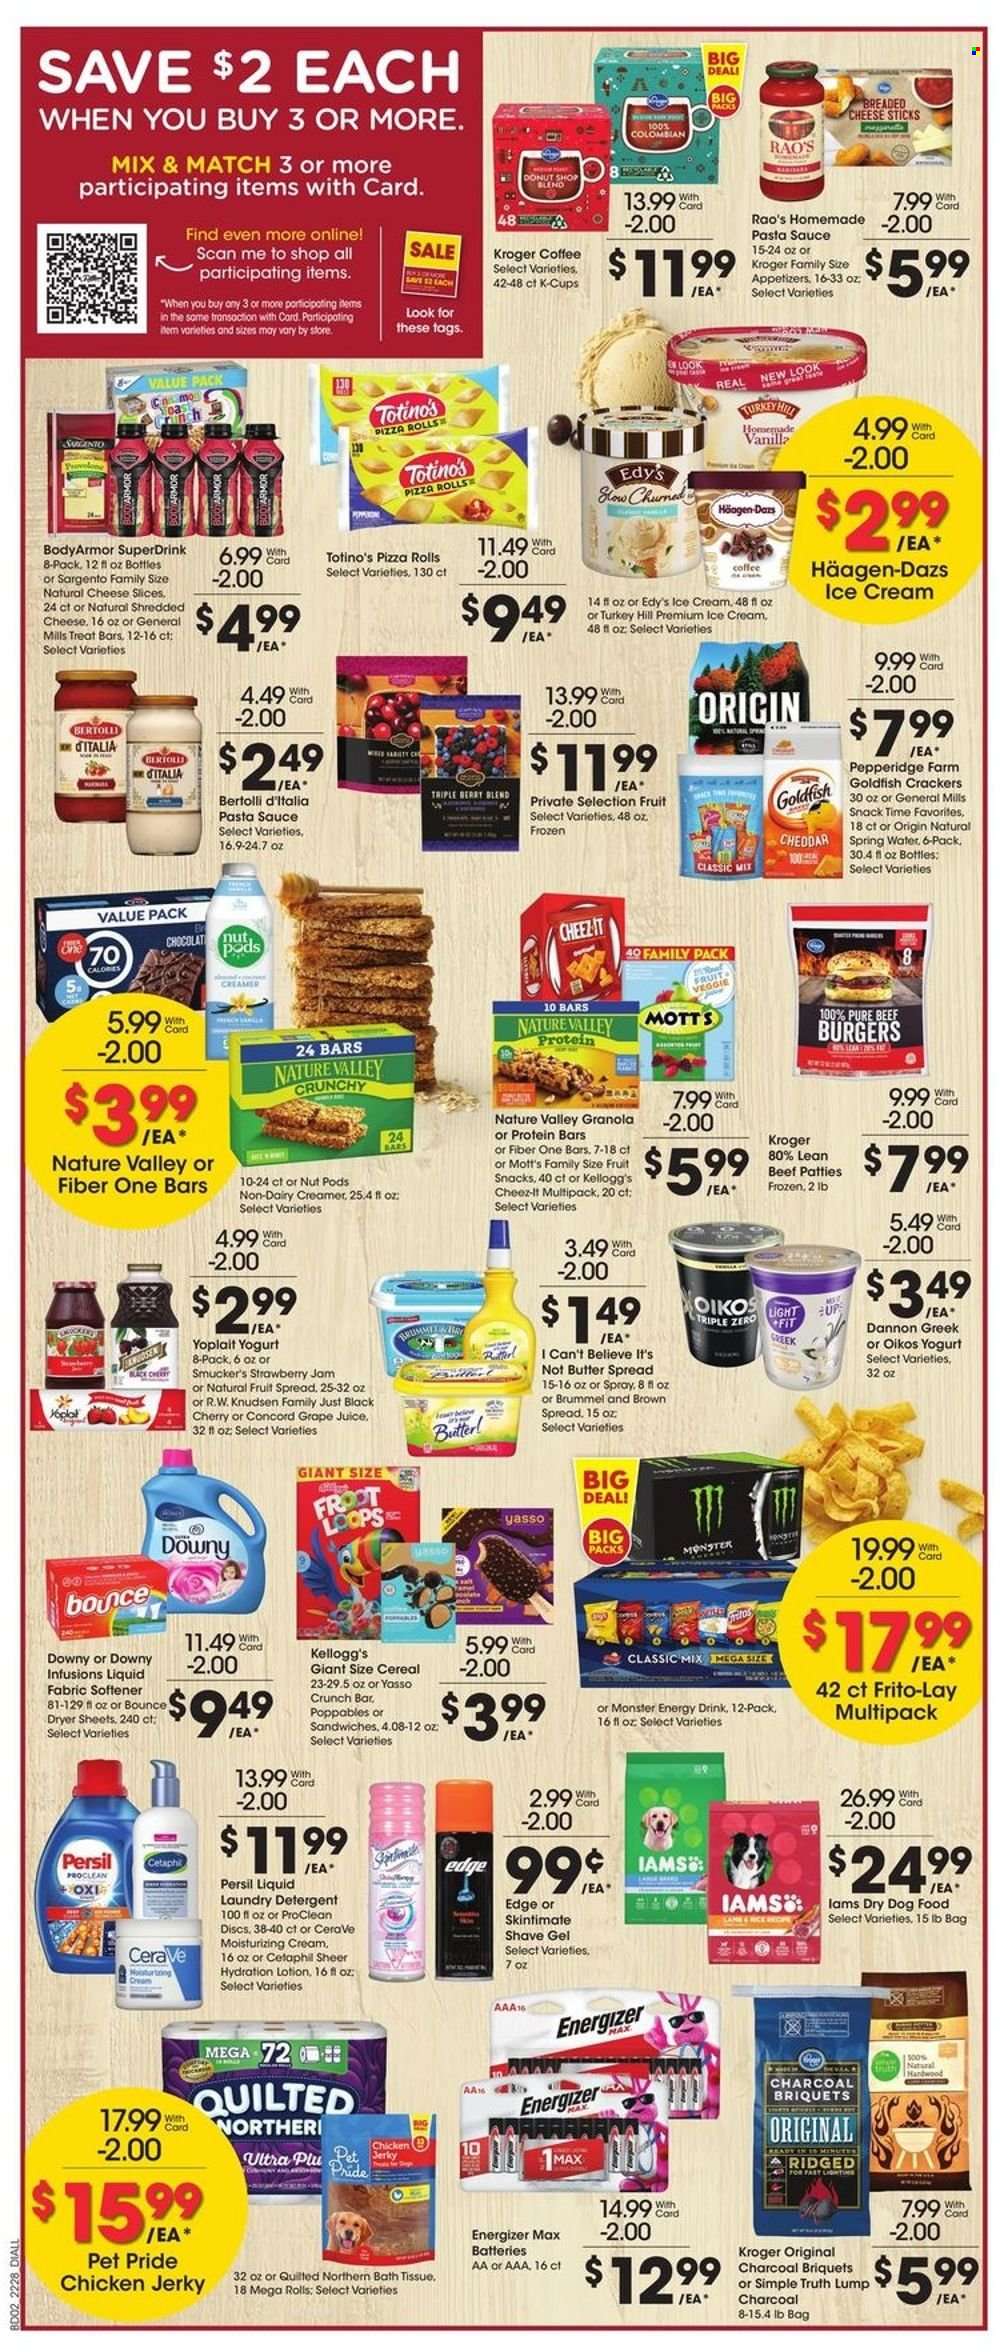 thumbnail - Dillons Flyer - 08/10/2022 - 08/16/2022 - Sales products - pizza rolls, cherries, Mott's, pizza, pasta sauce, sandwich, hamburger, sauce, beef burger, Bertolli, jerky, shredded cheese, sliced cheese, Sargento, yoghurt, Oikos, Yoplait, Dannon, butter, I Can't Believe It's Not Butter, non dairy creamer, creamer, ice cream, Häagen-Dazs, cheese sticks, crackers, Kellogg's, fruit snack, Goldfish, Frito-Lay, Cheez-It, strawberry jam, cereals, granola, protein bar, Nature Valley, Fiber One, fruit jam, juice, energy drink, Monster, Monster Energy, spring water, coffee, coffee capsules, K-Cups, beef meat, bath tissue, Quilted Northern, detergent, Persil, fabric softener, laundry detergent, Bounce, dryer sheets, Downy Laundry, CeraVe, body lotion, shave gel, battery, Energizer, animal food, dry dog food, dog food, Iams, lighting, charcoal. Page 2.